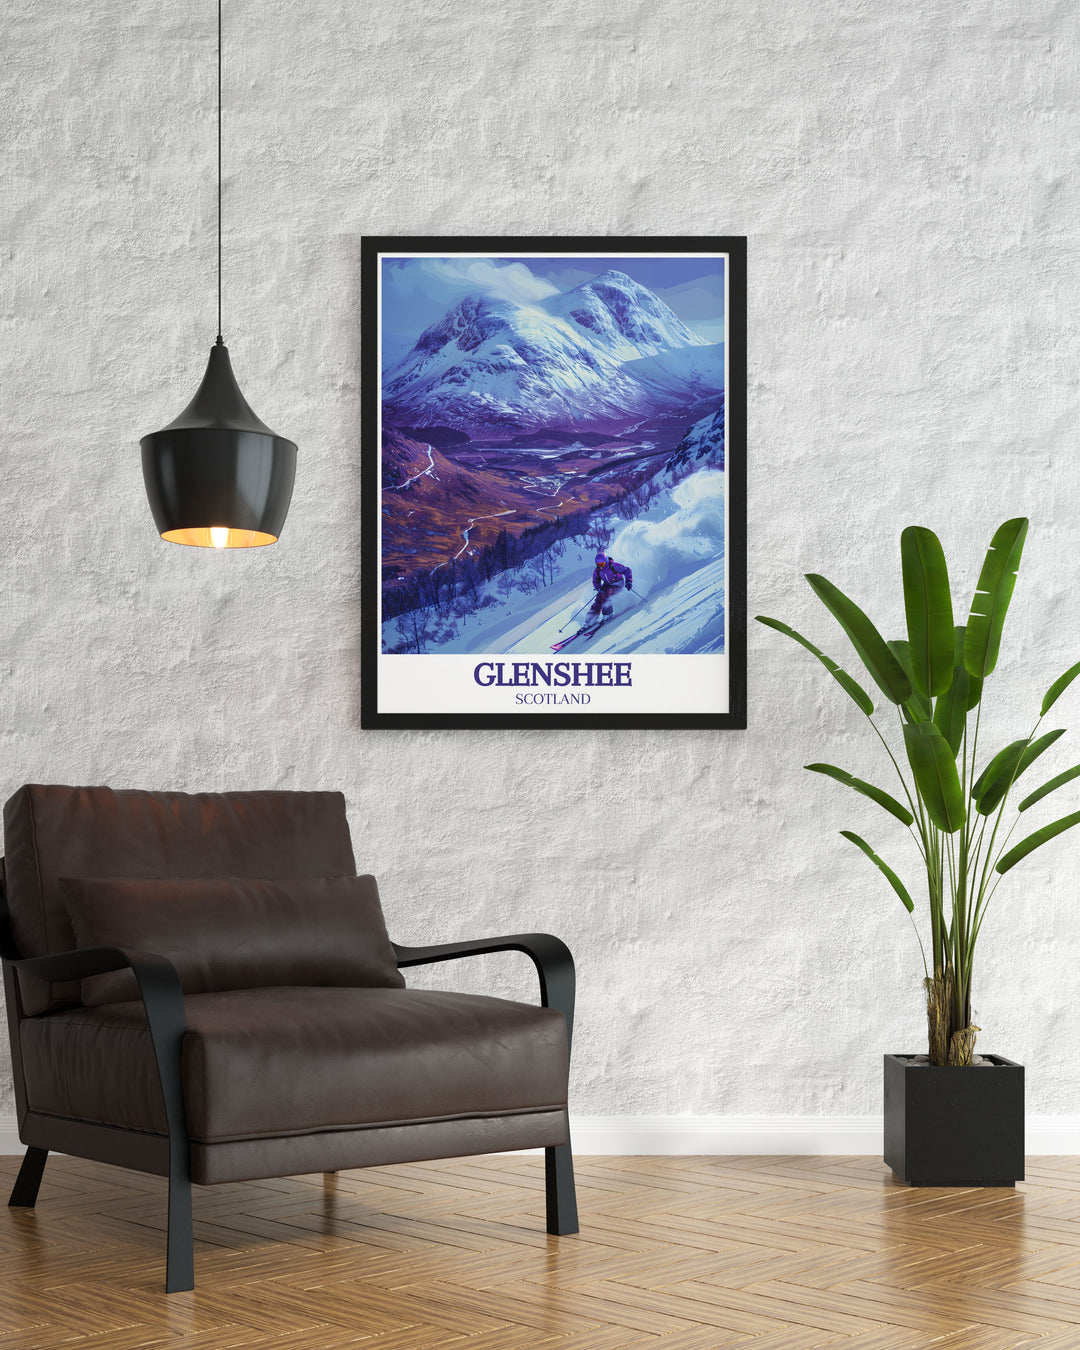 Highlighting the serene landscapes of the Grampian Mountains, this travel poster showcases the regions natural beauty and dramatic scenery. Perfect for nature lovers, this piece brings the pristine wilderness of the Scottish Highlands into your decor.